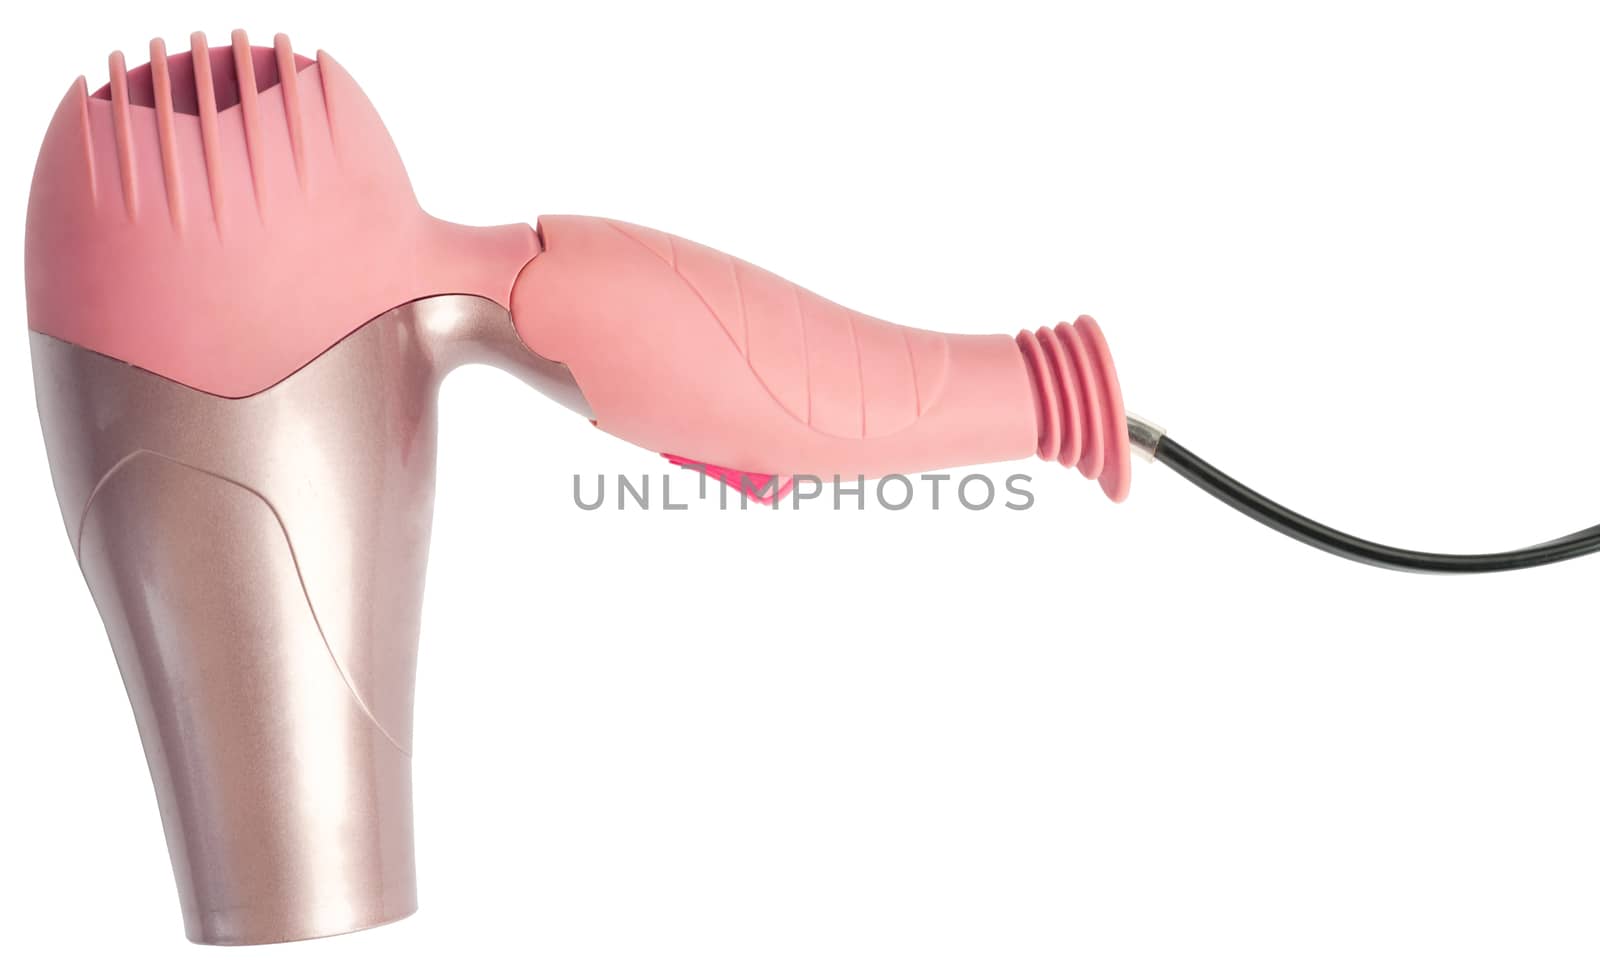 Pink hairdryer on isolated white background. Beauty